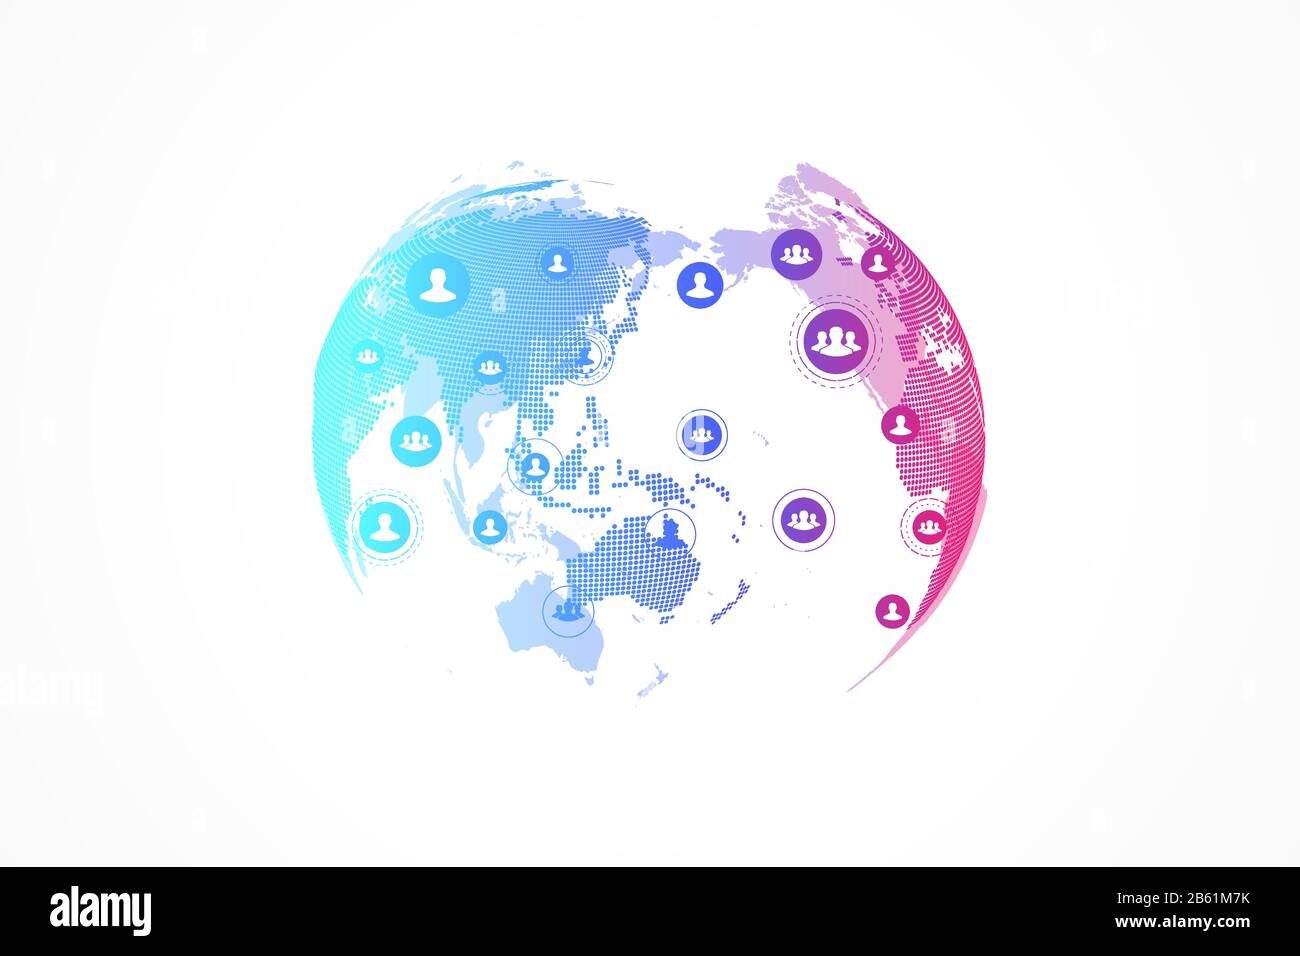 Social media network and marketing concept on World Map background. Global business concept and internet technology, Analytical networks. Vector Stock Vector